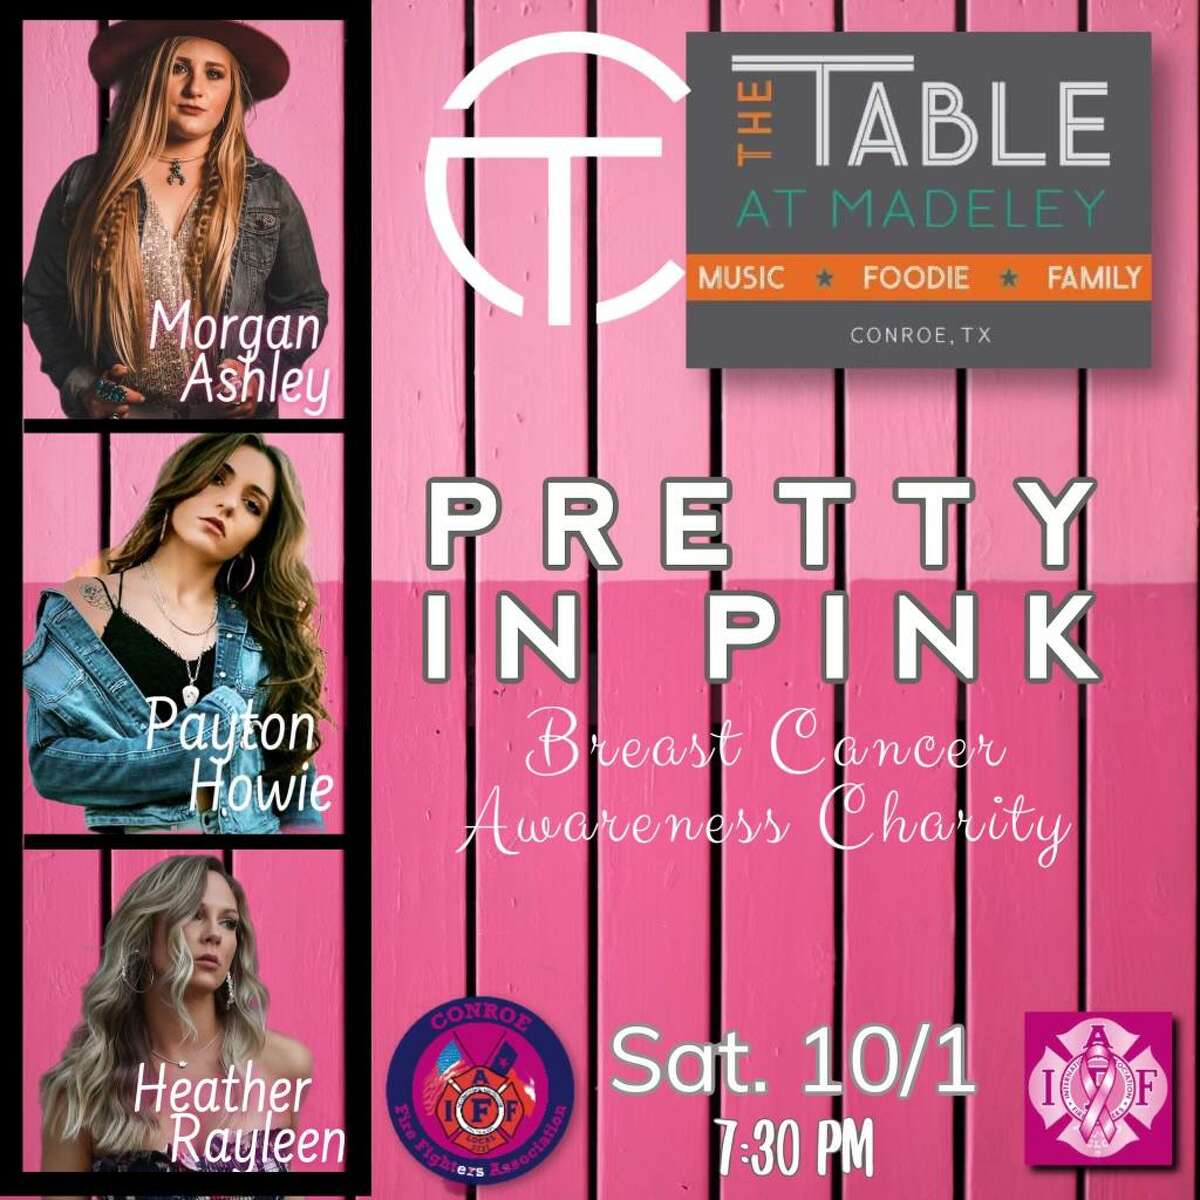 In honor of Breast Cancer Awareness Month in October, The Table at Madeley in Conroe is partnering with Conroe Professional Firefighters Association for a special charity concert event. It’s at 6:30 p.m. Saturday with opening act Payton Riley then at 7:30 p.m. Payton Howie, Morgan Ashley and Heather Rayleen present an all-female lineup.